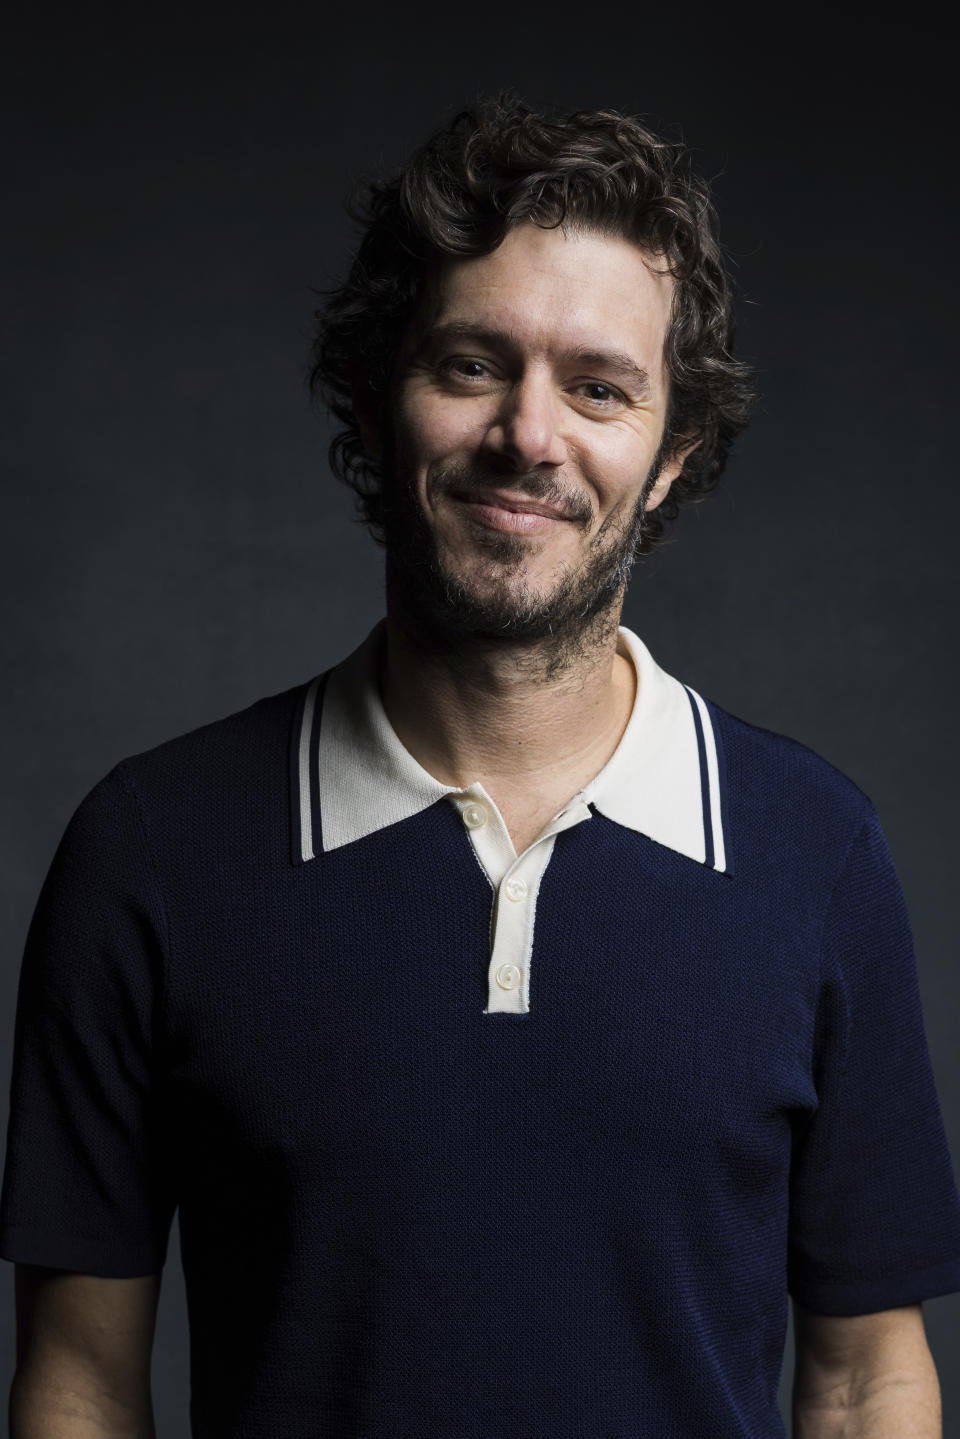 Adam Brody poses for a portrait to promote the film "Shazam! Fury of the Gods" at The London Hotel in West Hollywood, Calif., on Monday, Feb. 27, 2023. (Photo by Willy Sanjuan/Invision/AP)